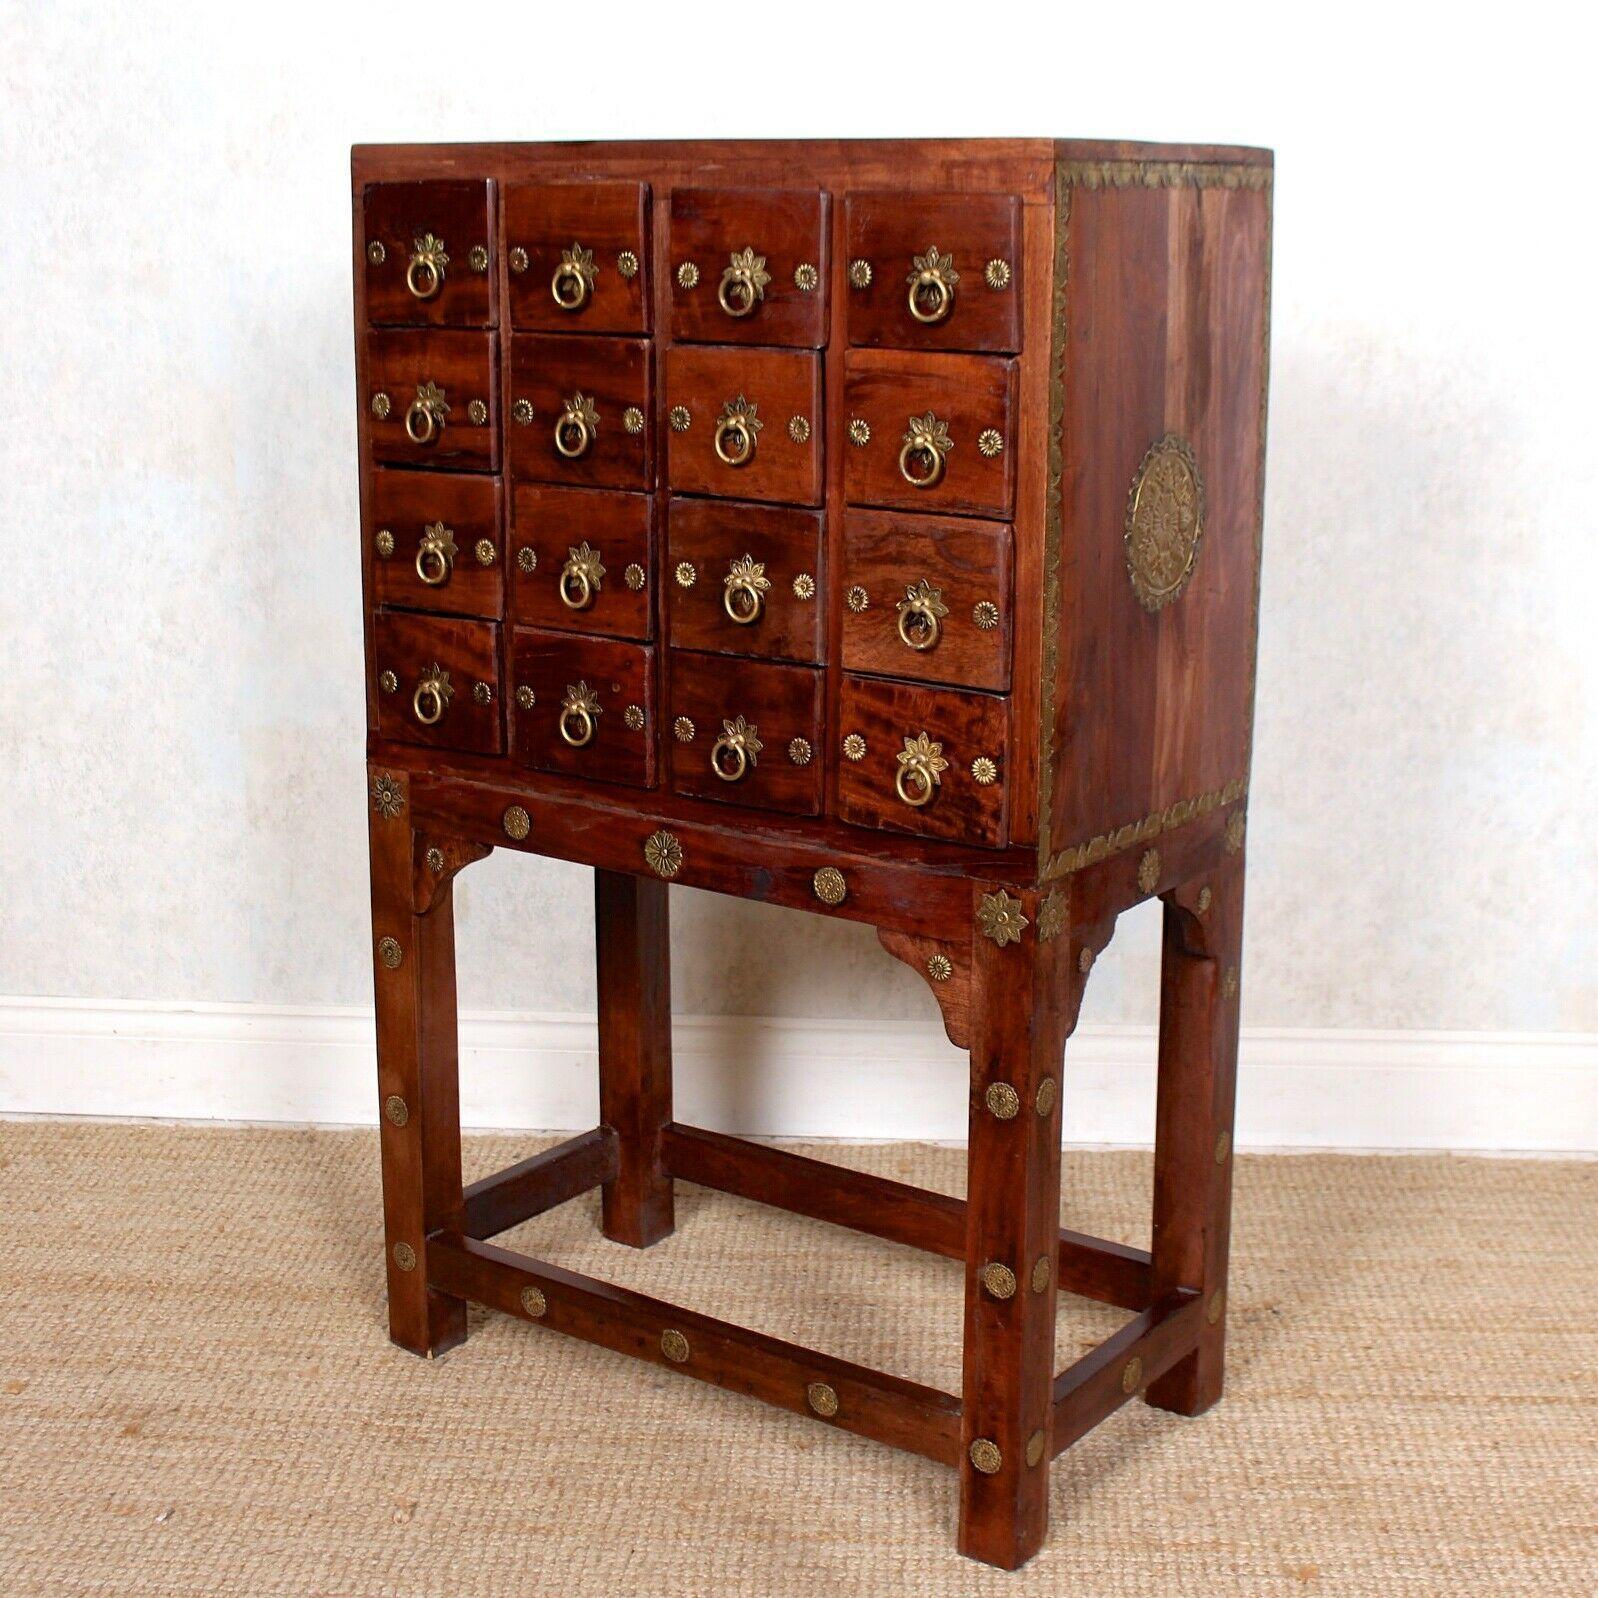 Chinese Apothecary Cabinet Spice Chest Haberdashery Oriental Hardwood For Sale 2